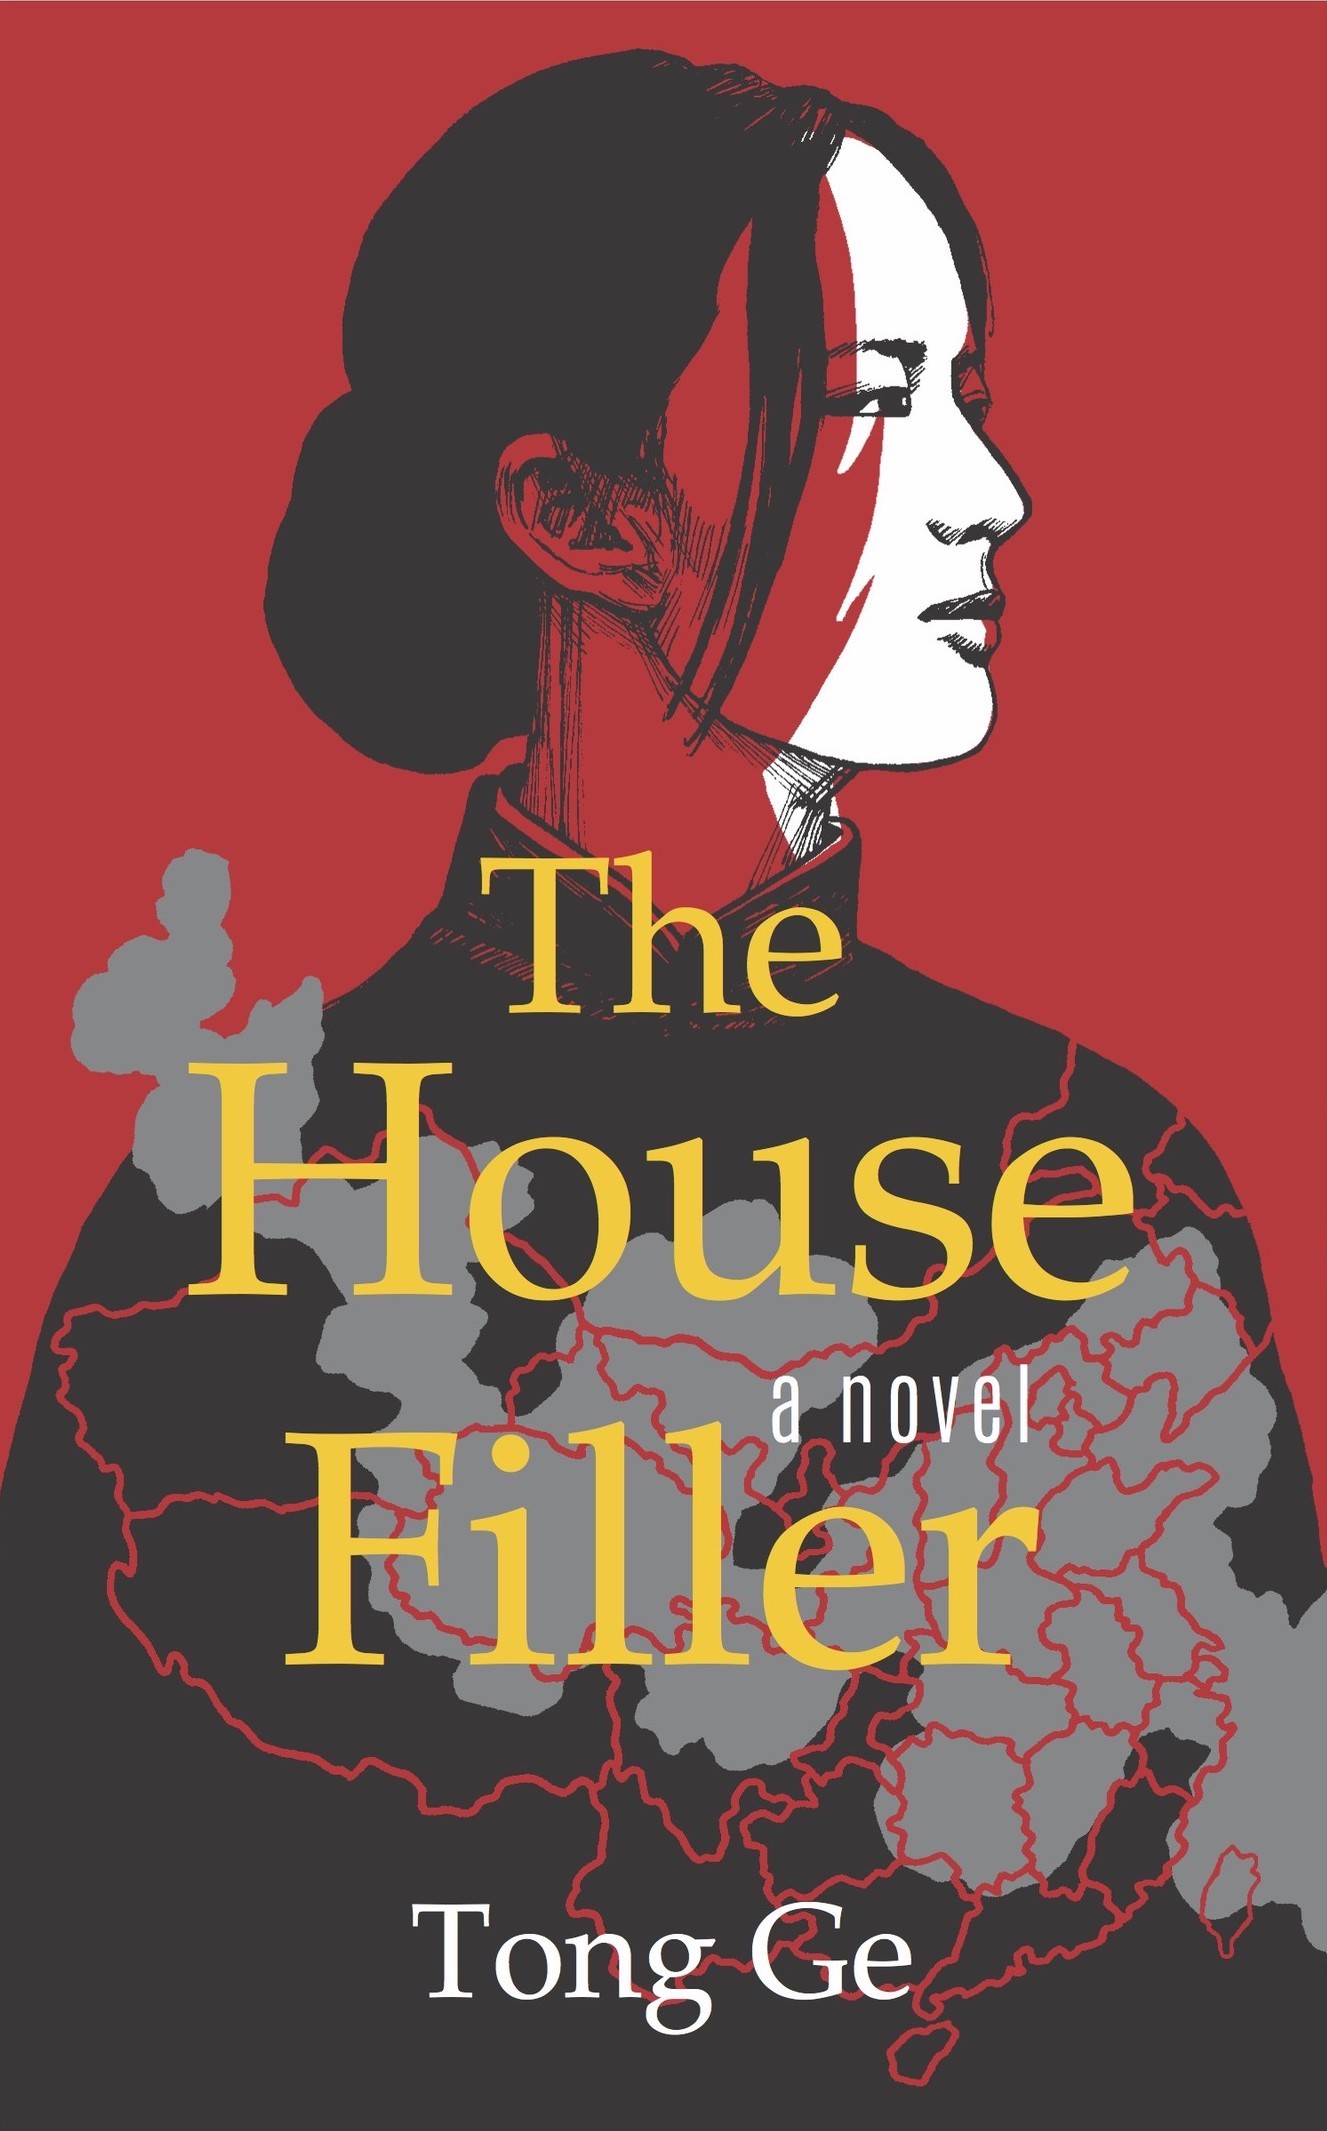 The cover of The House Filler by Tong Ge.